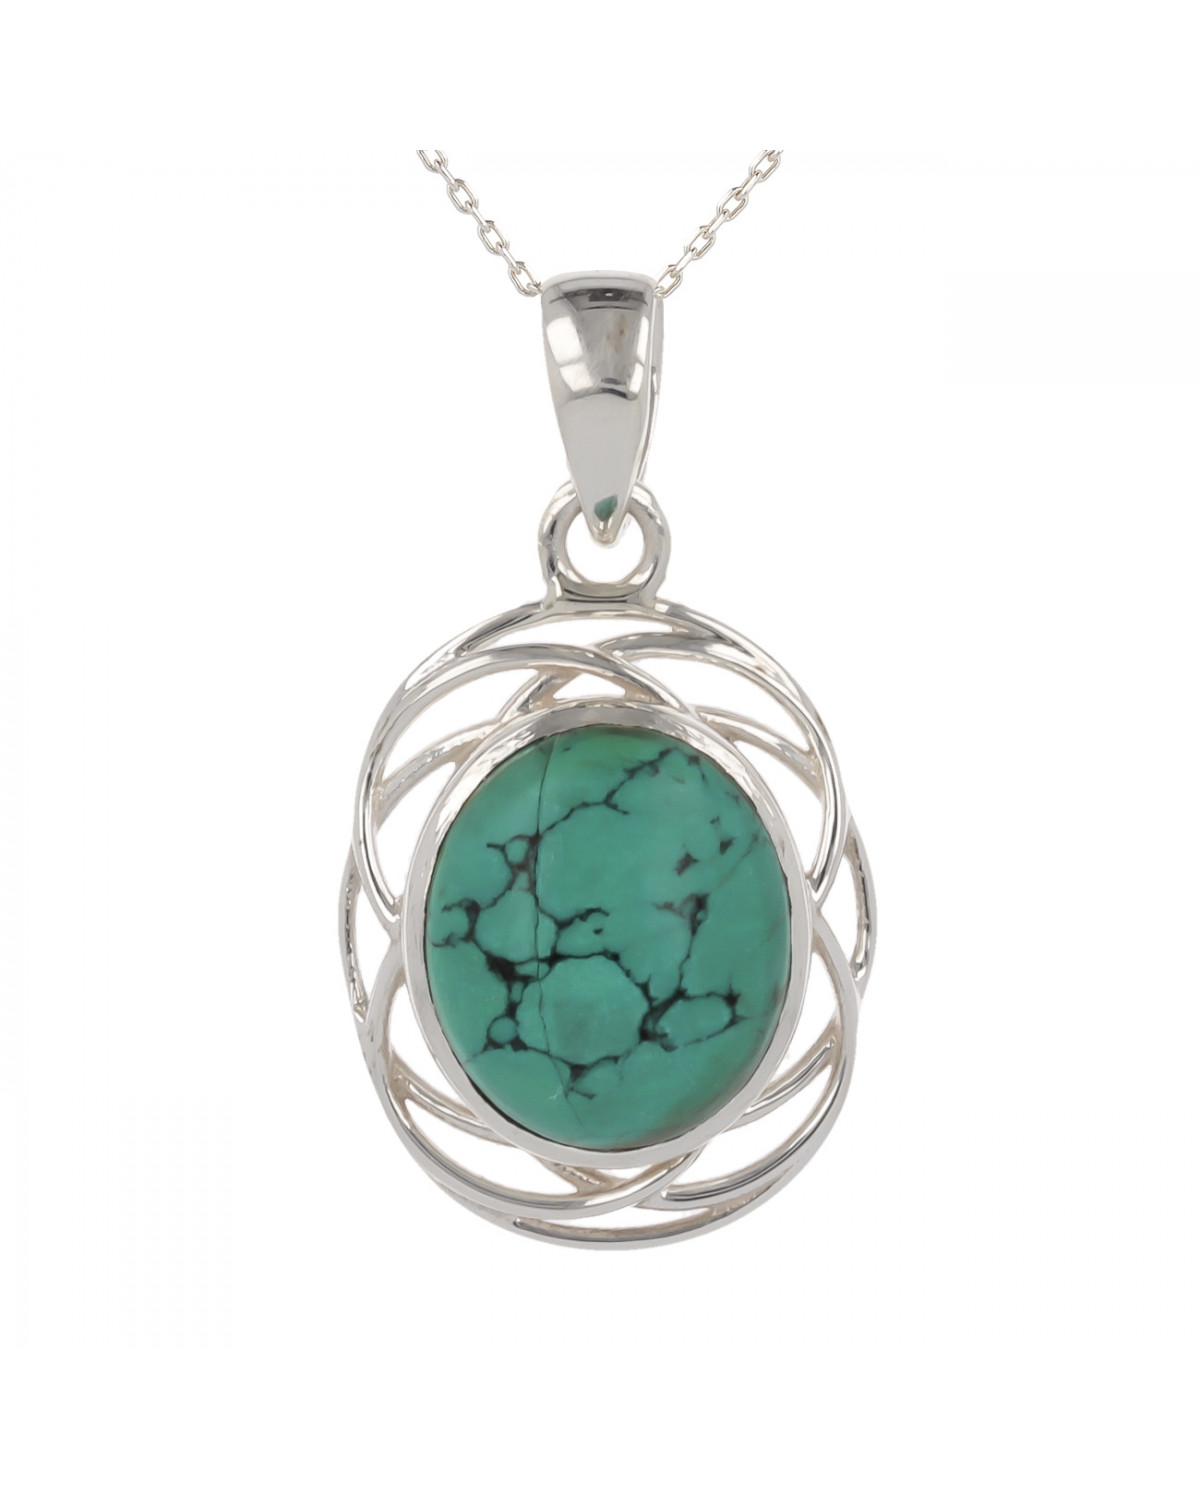 original gift woman-Fine Stones-Pendant-Turquoise Stone-Sterling Silver-Woman